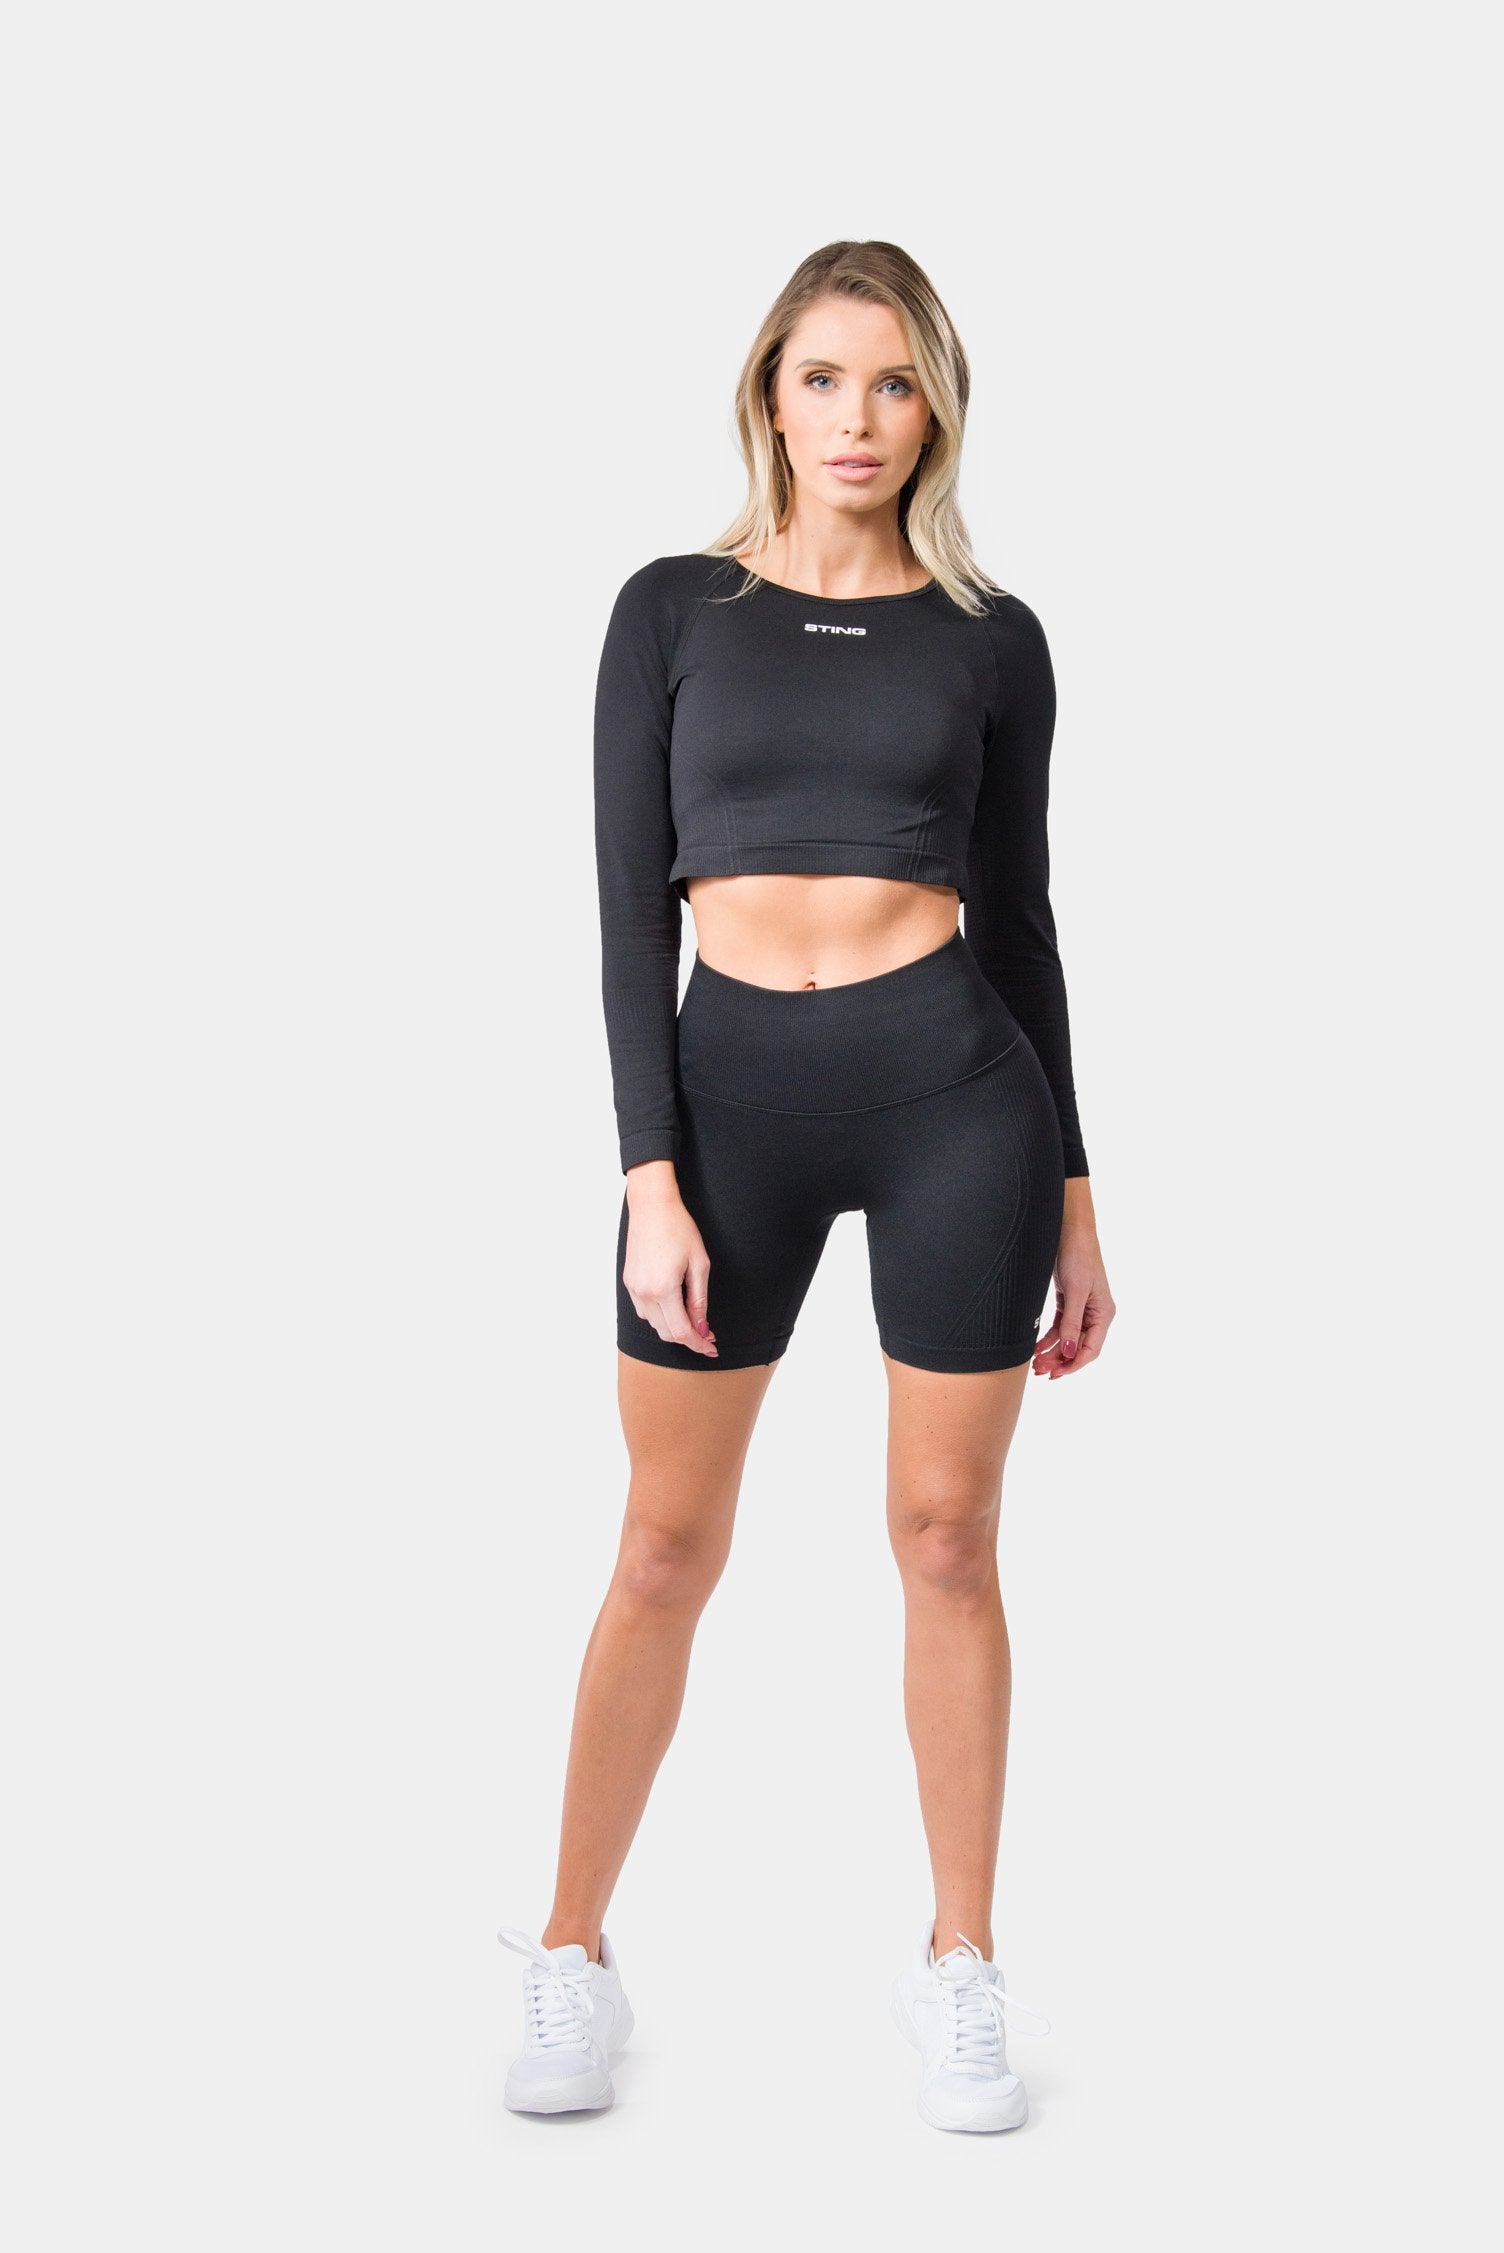 Sting Allure Seamless Long Sleeve – Sting Sports Canada ᵀᴹ